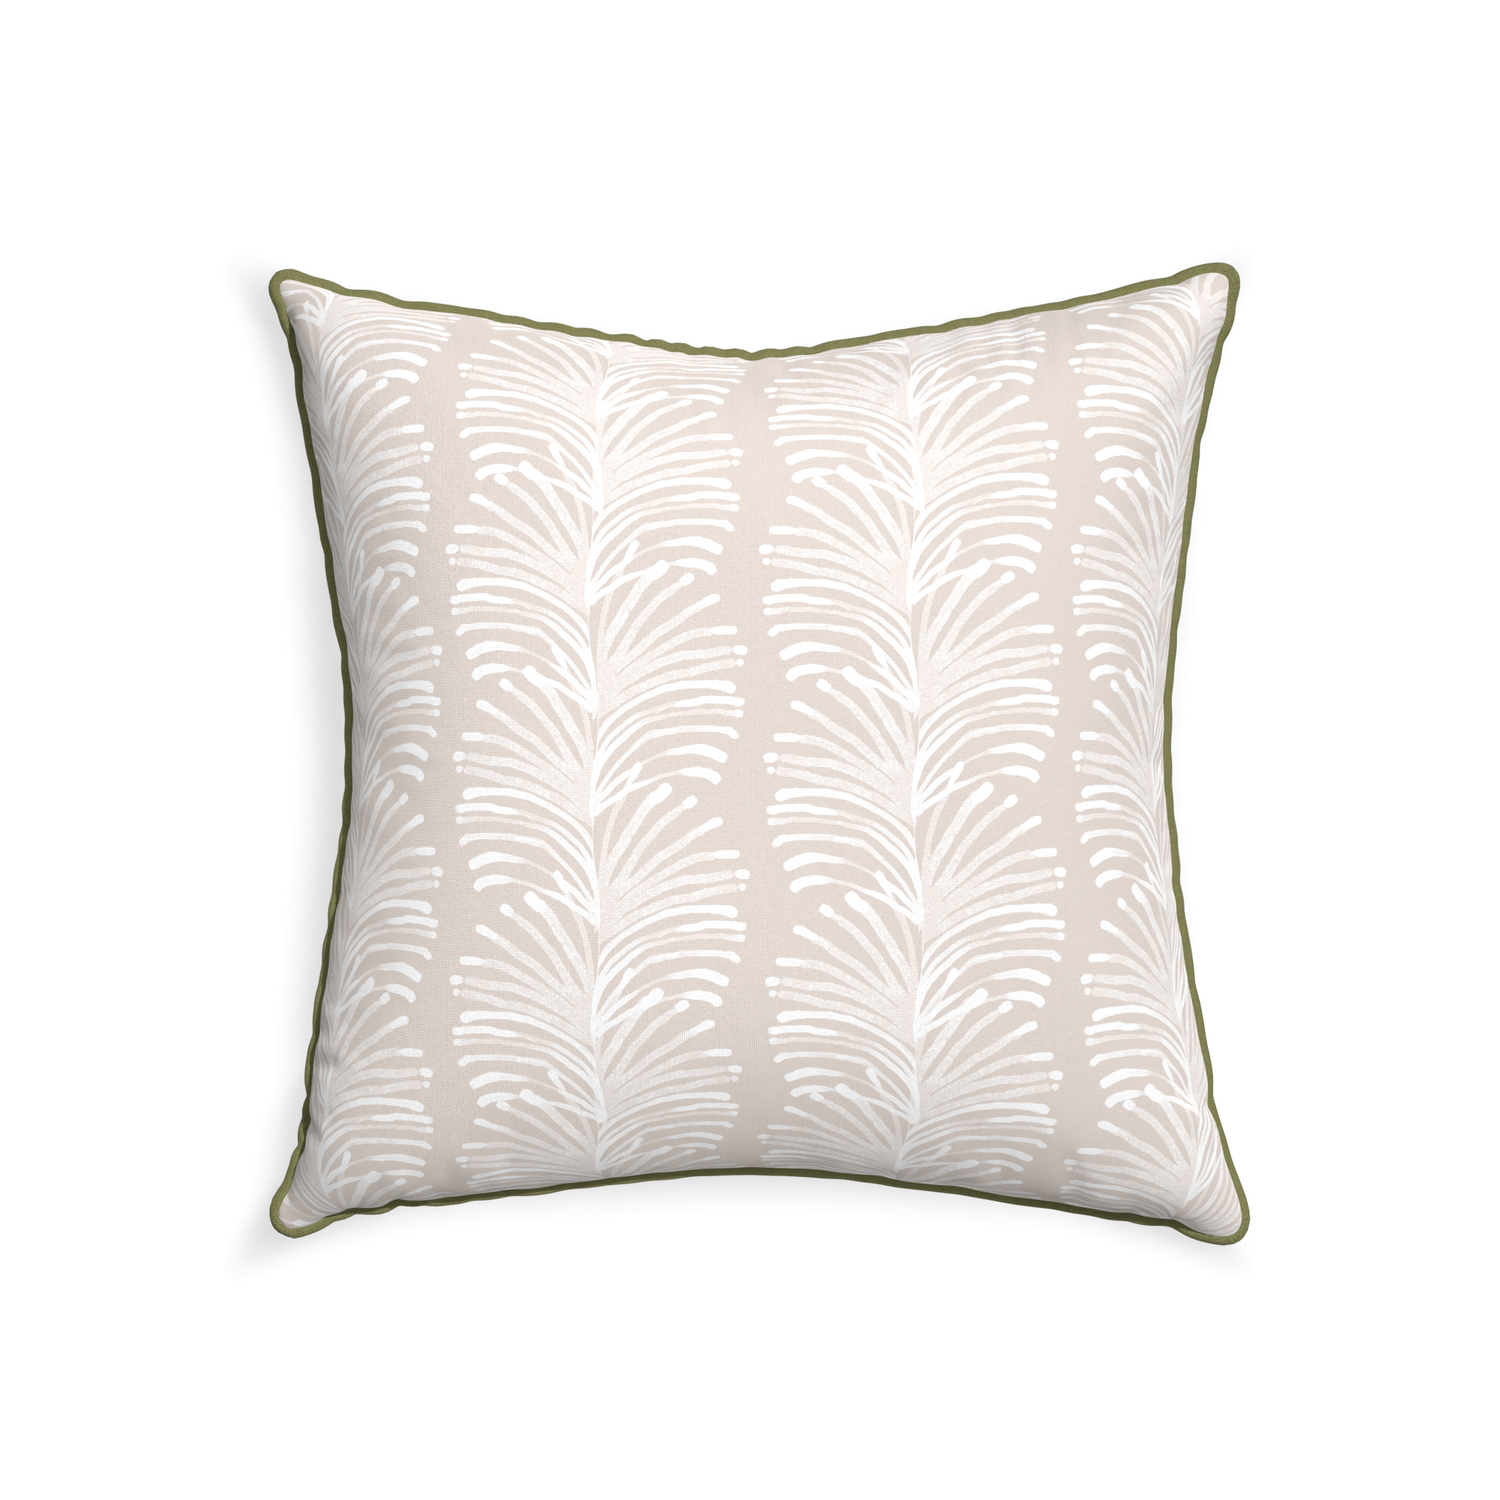 22-square emma sand custom sand colored botanical stripepillow with moss piping on white background